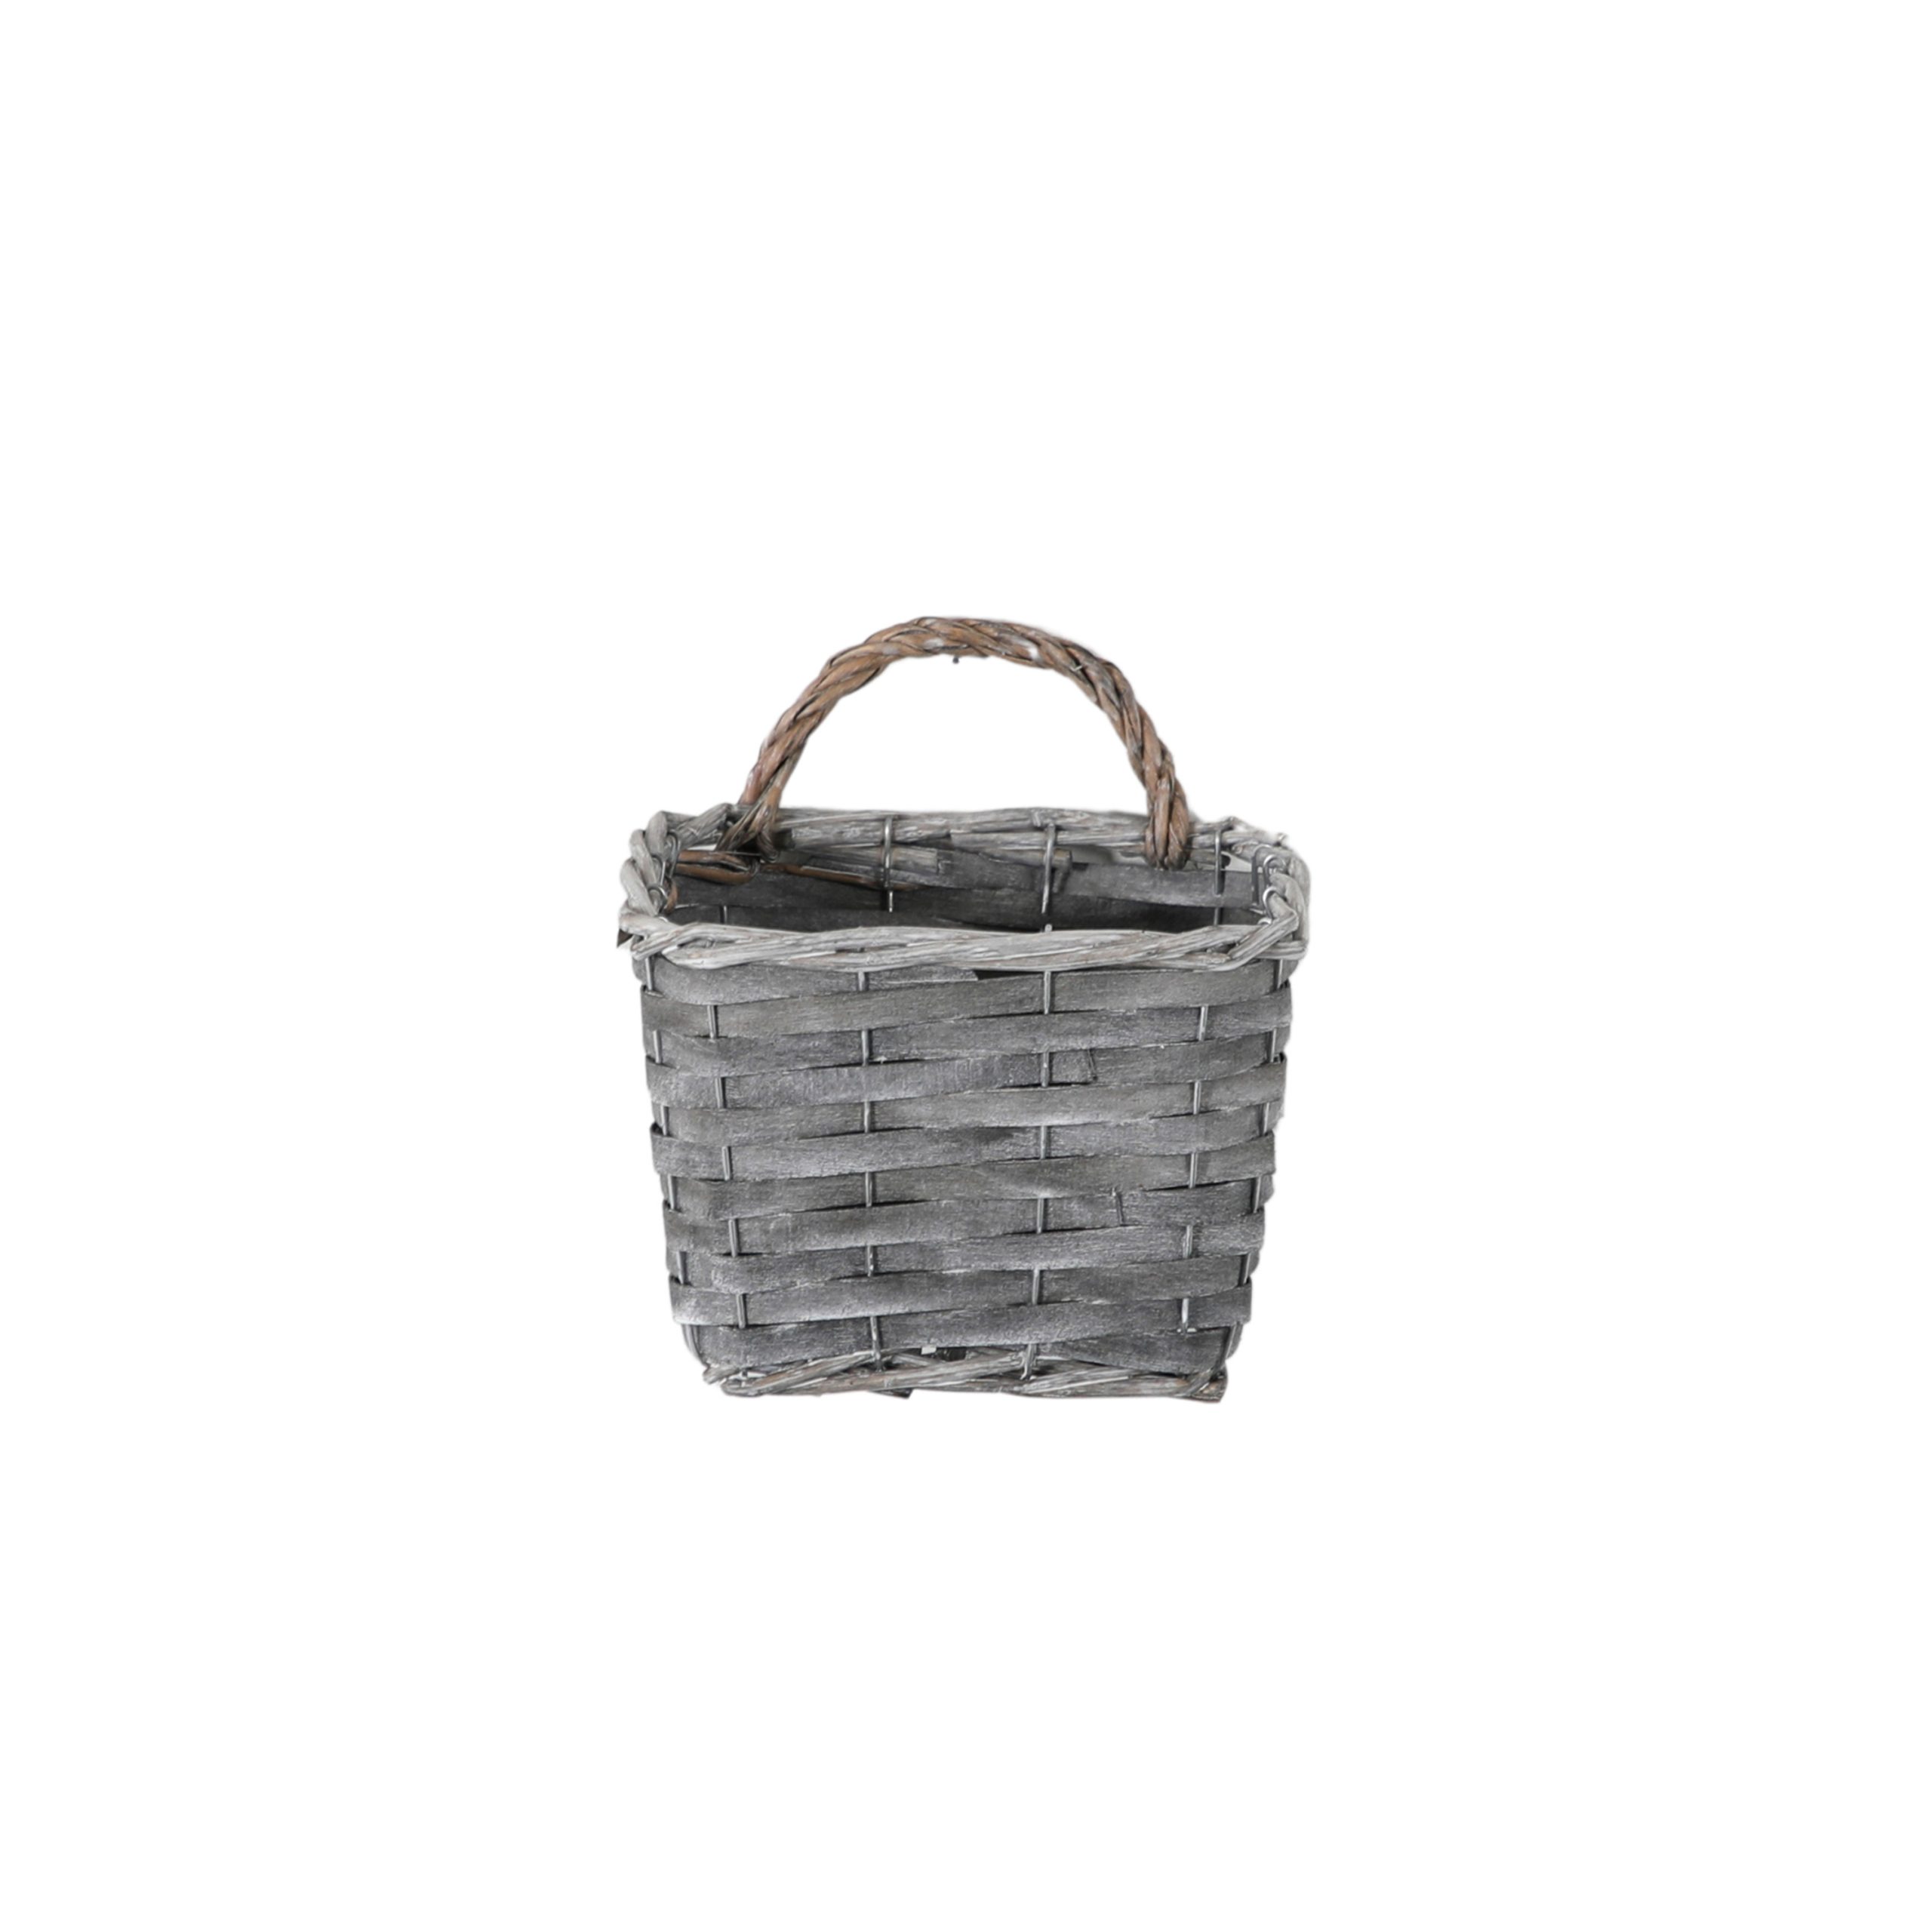 Gallery Direct Buxley Hanging Basket Willow Grey